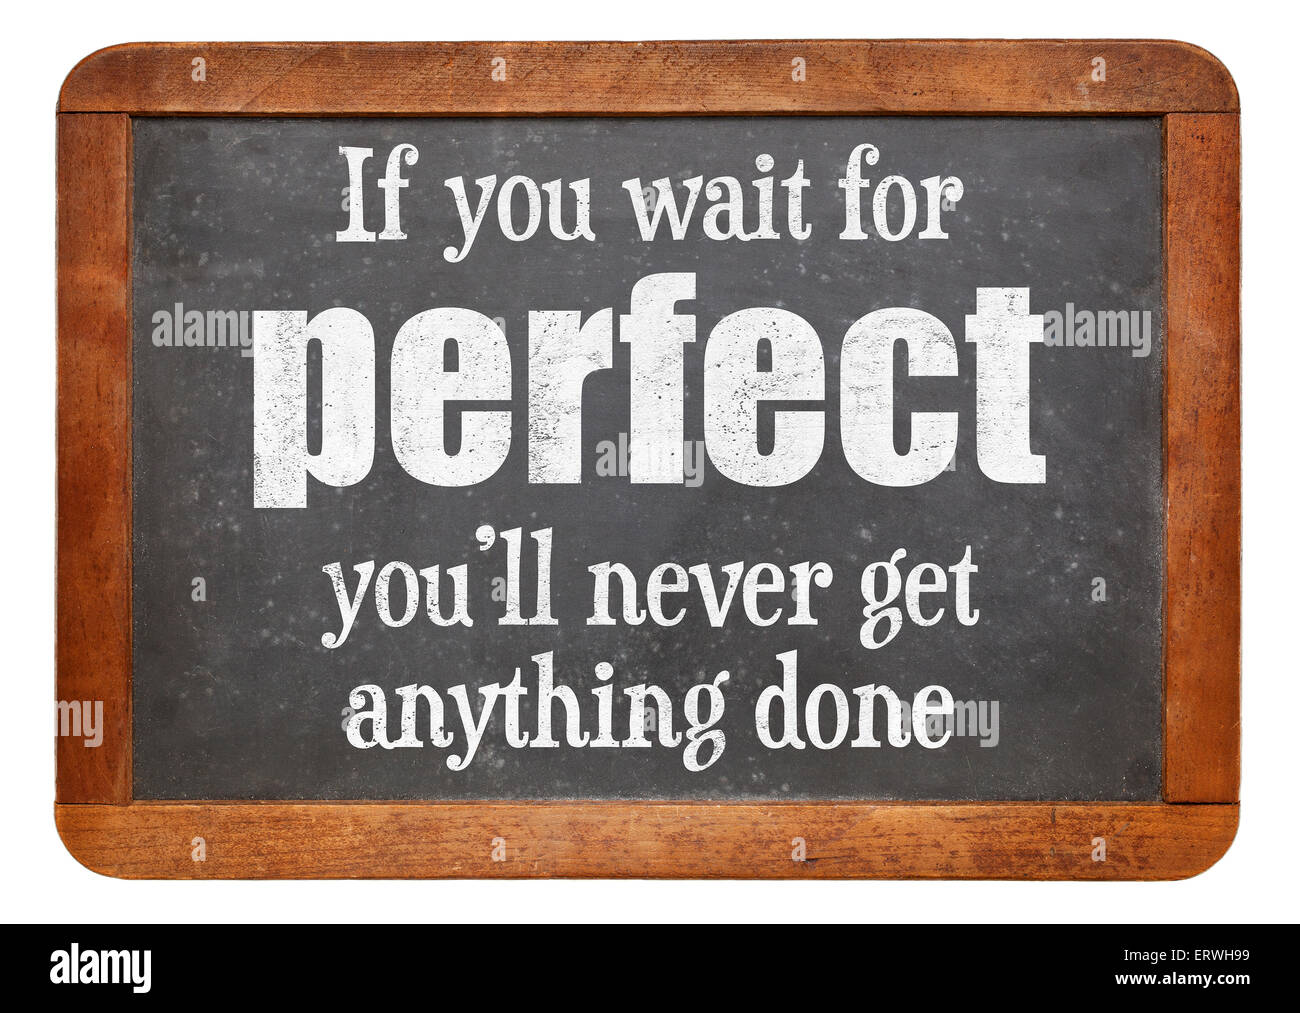 If you wait for perfect you will never get anything done - words of wisdom on a vintage slate blackboard Stock Photo